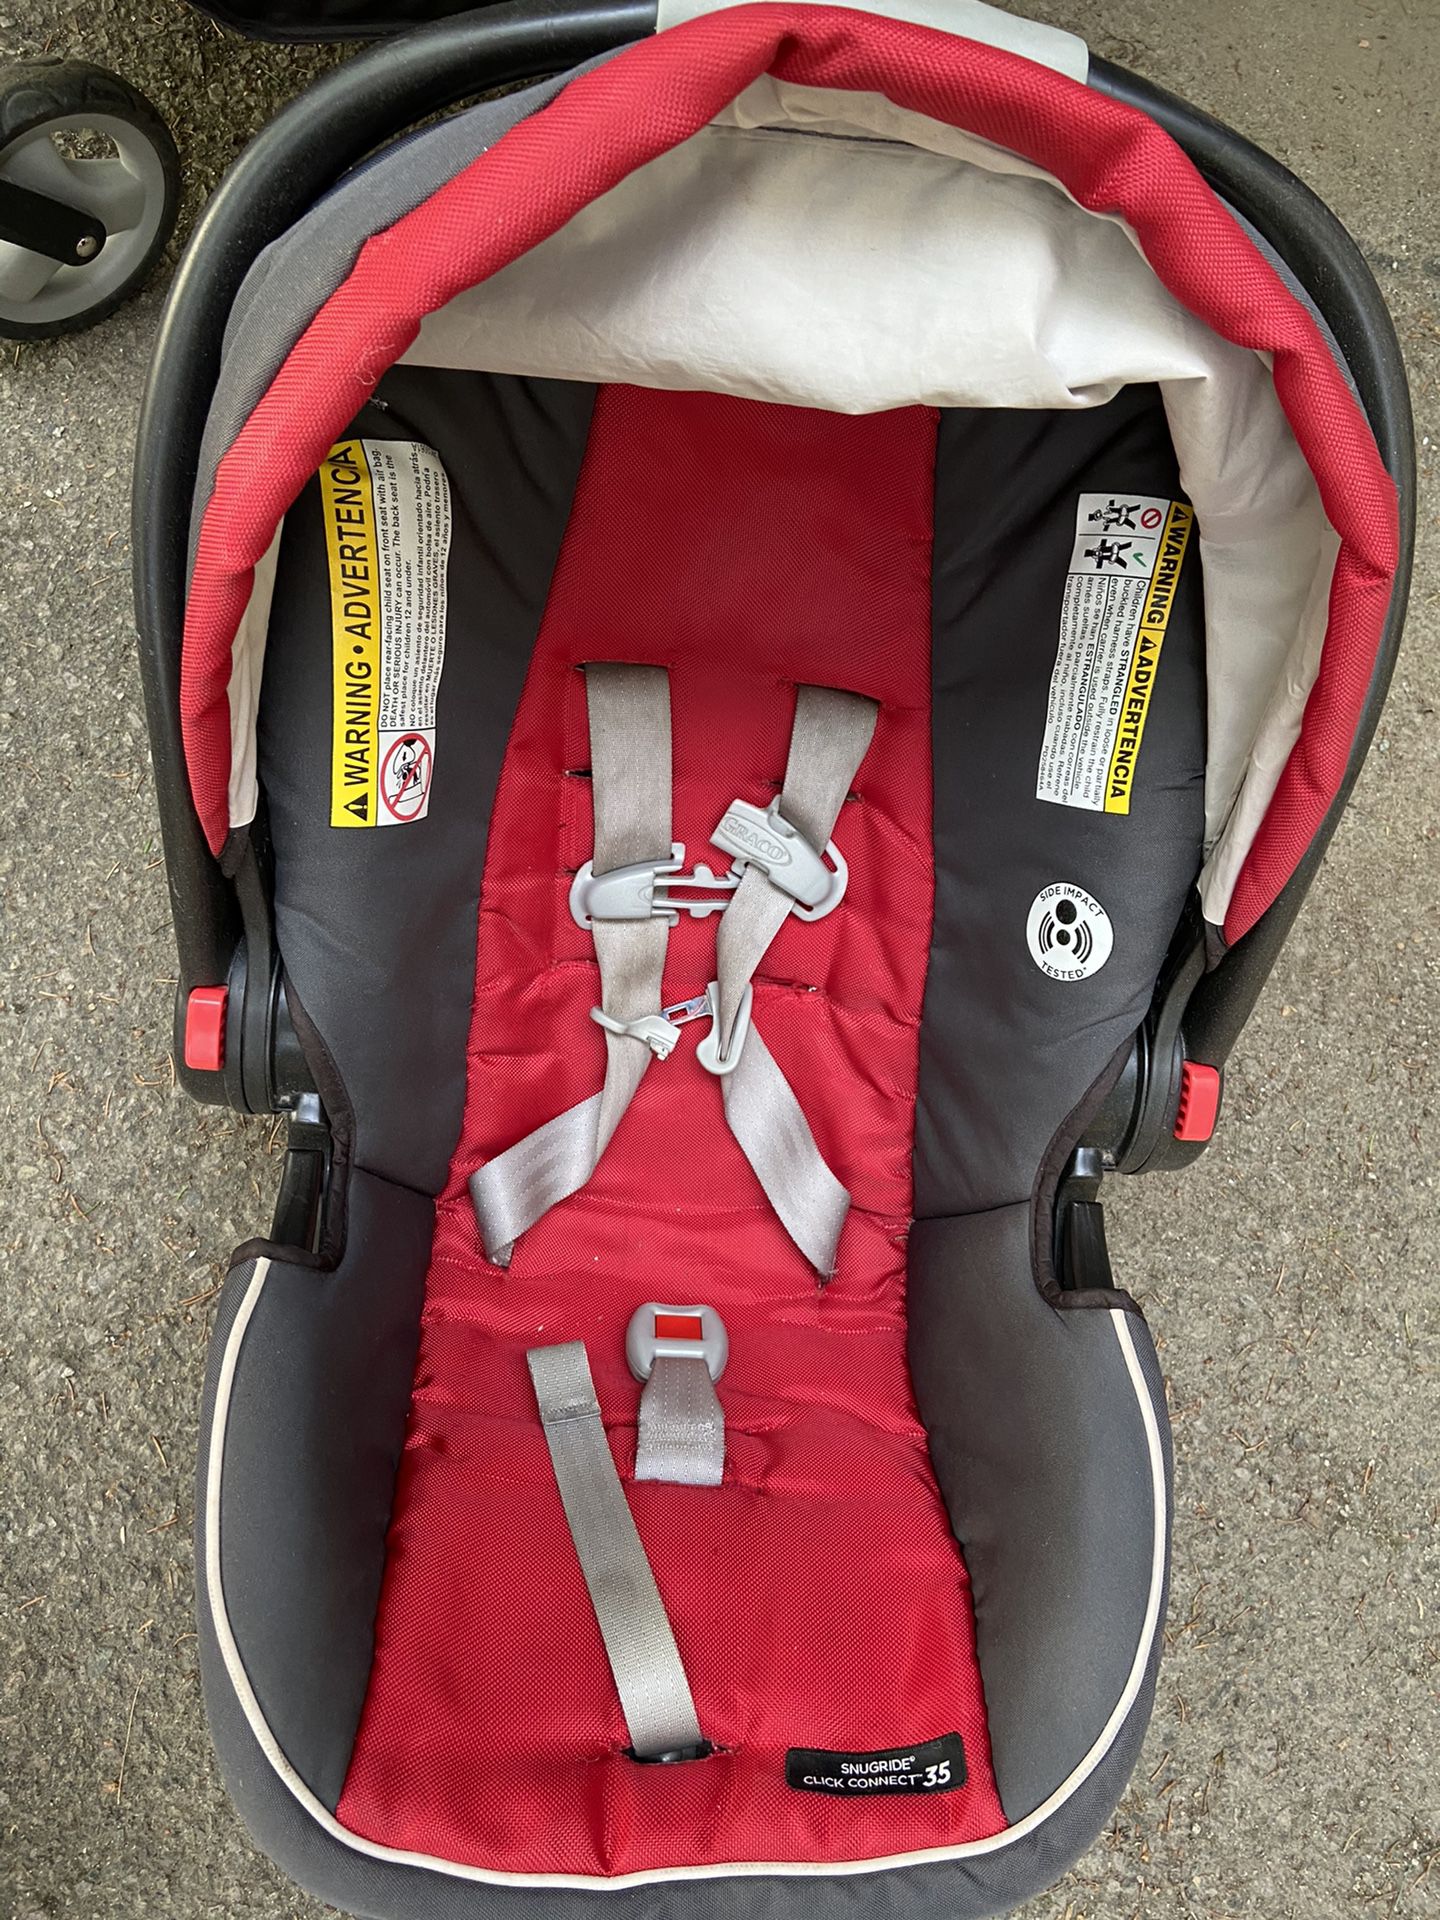 Graco snug ride 35 car seat with two bases